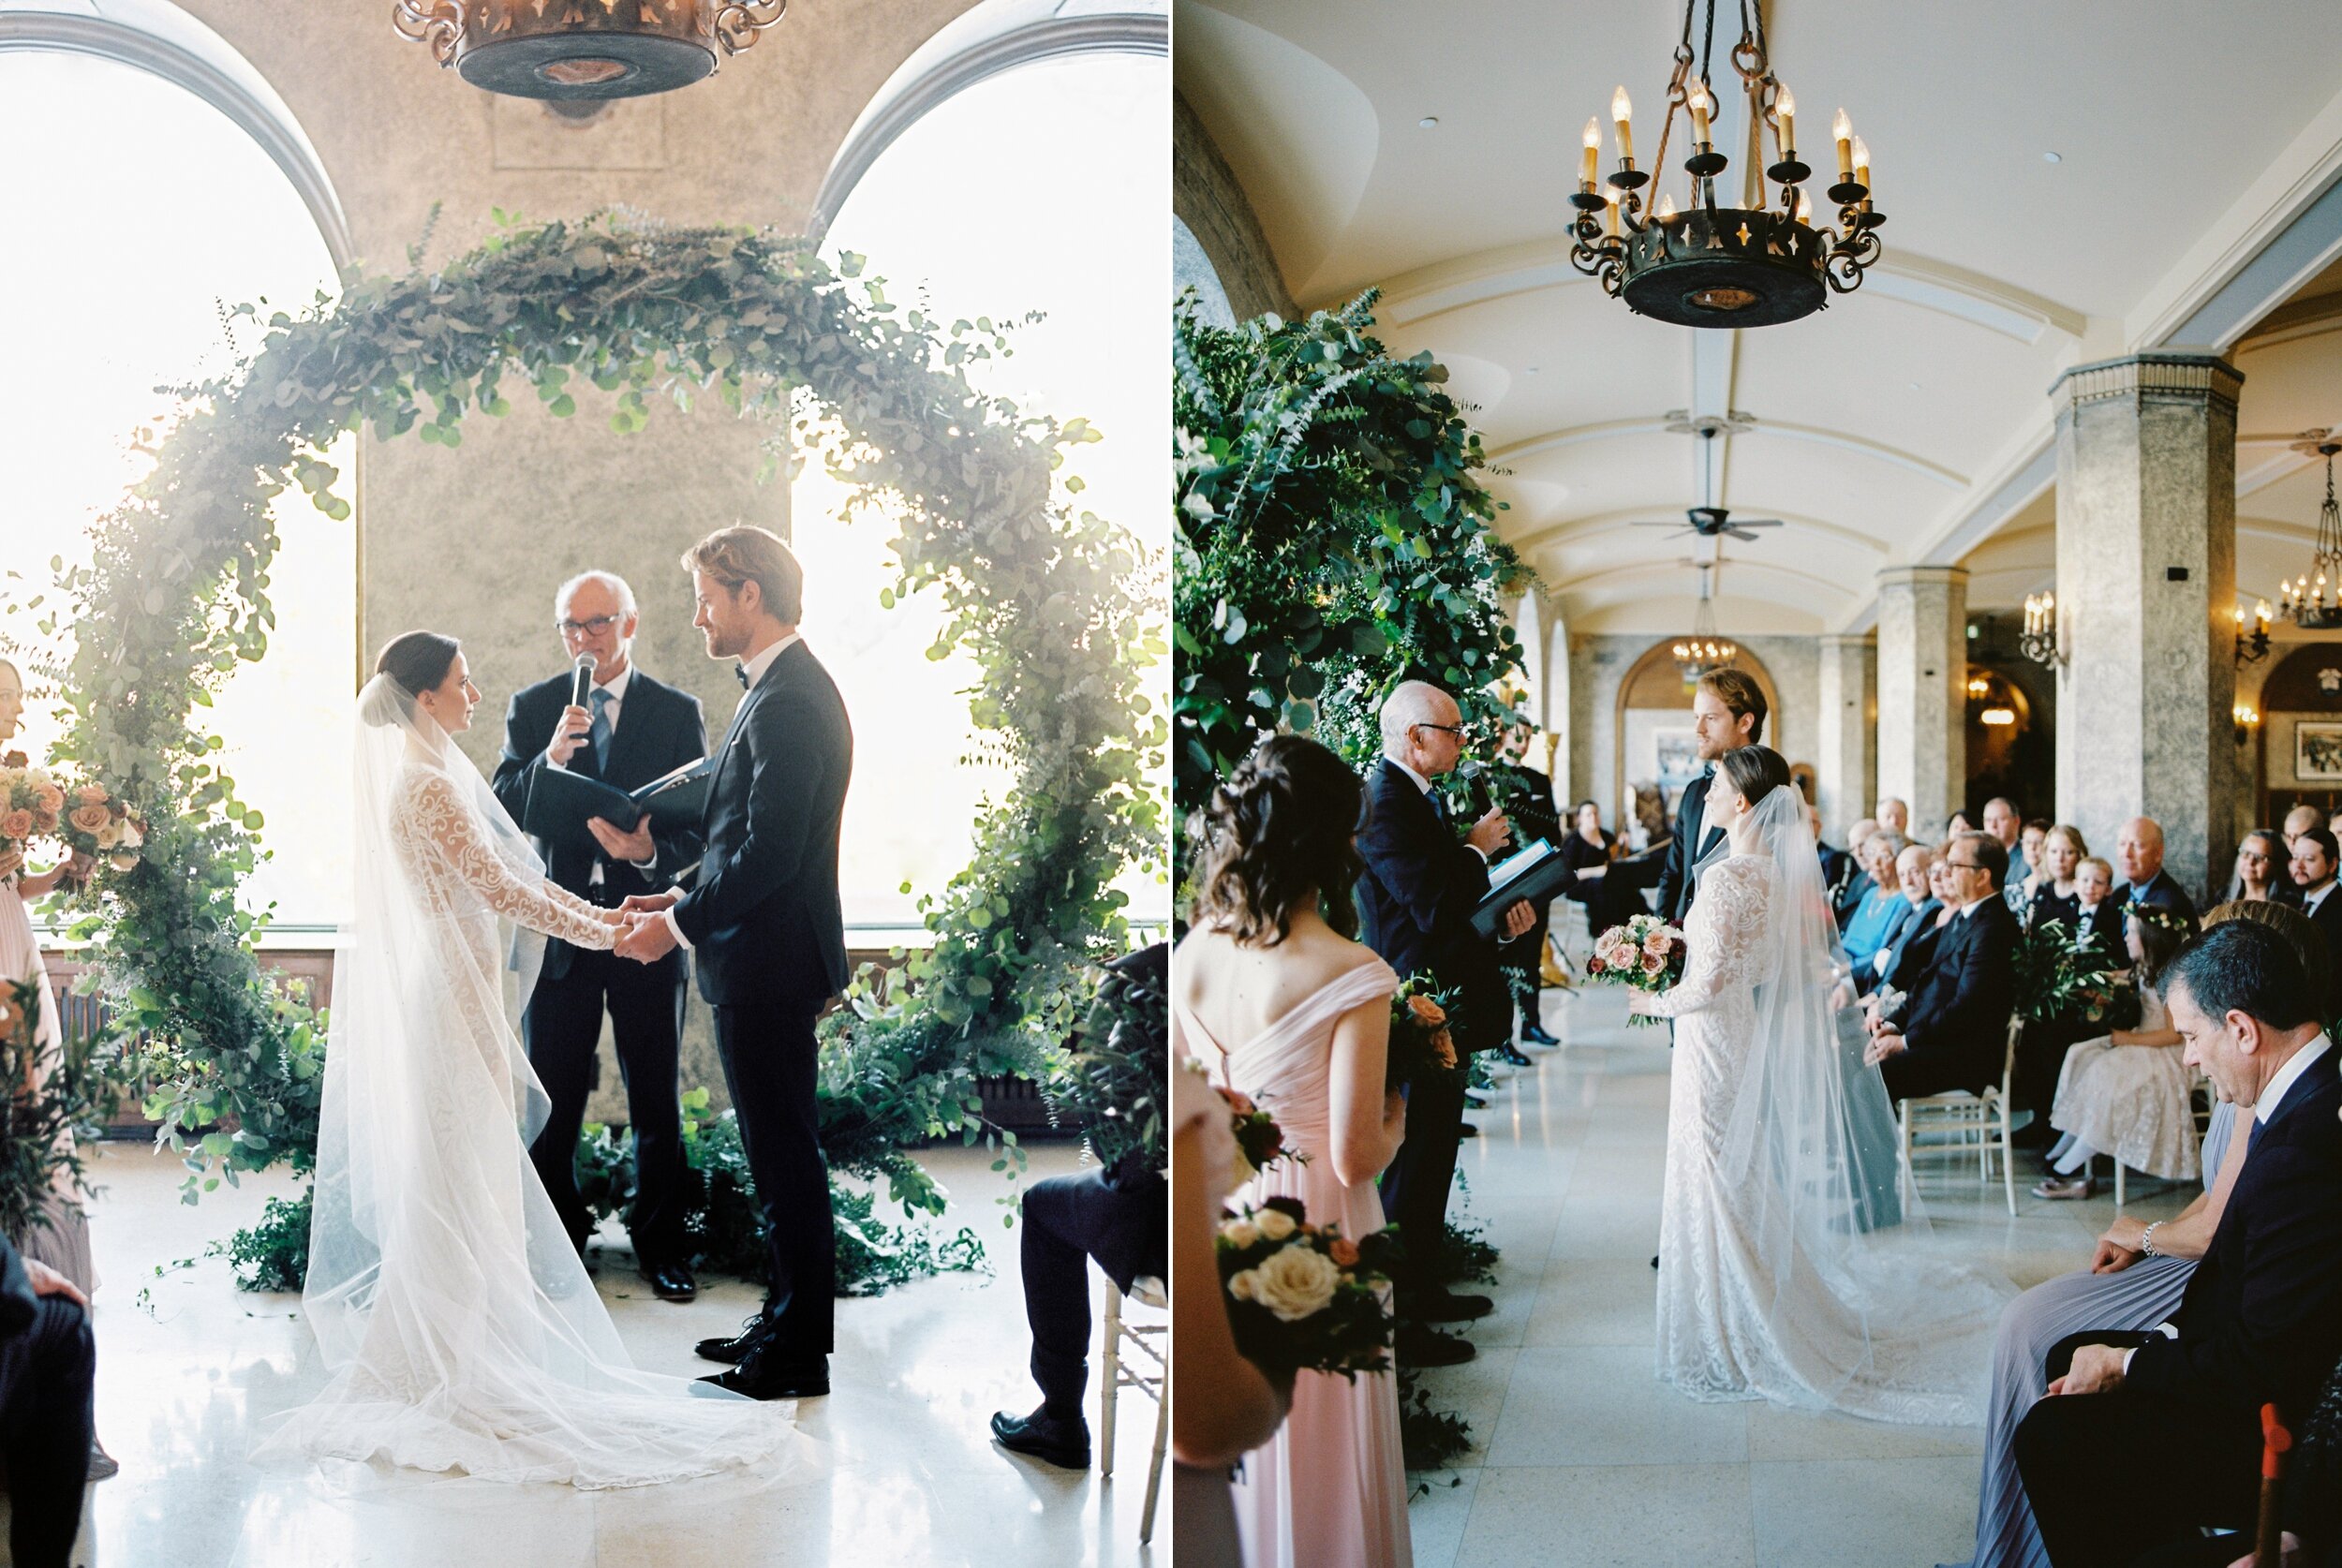  Wedding ceremony arches | infinity circle of greenery leaves and florals for the best wedding ceremony backdrop  at the banff springs hotel 